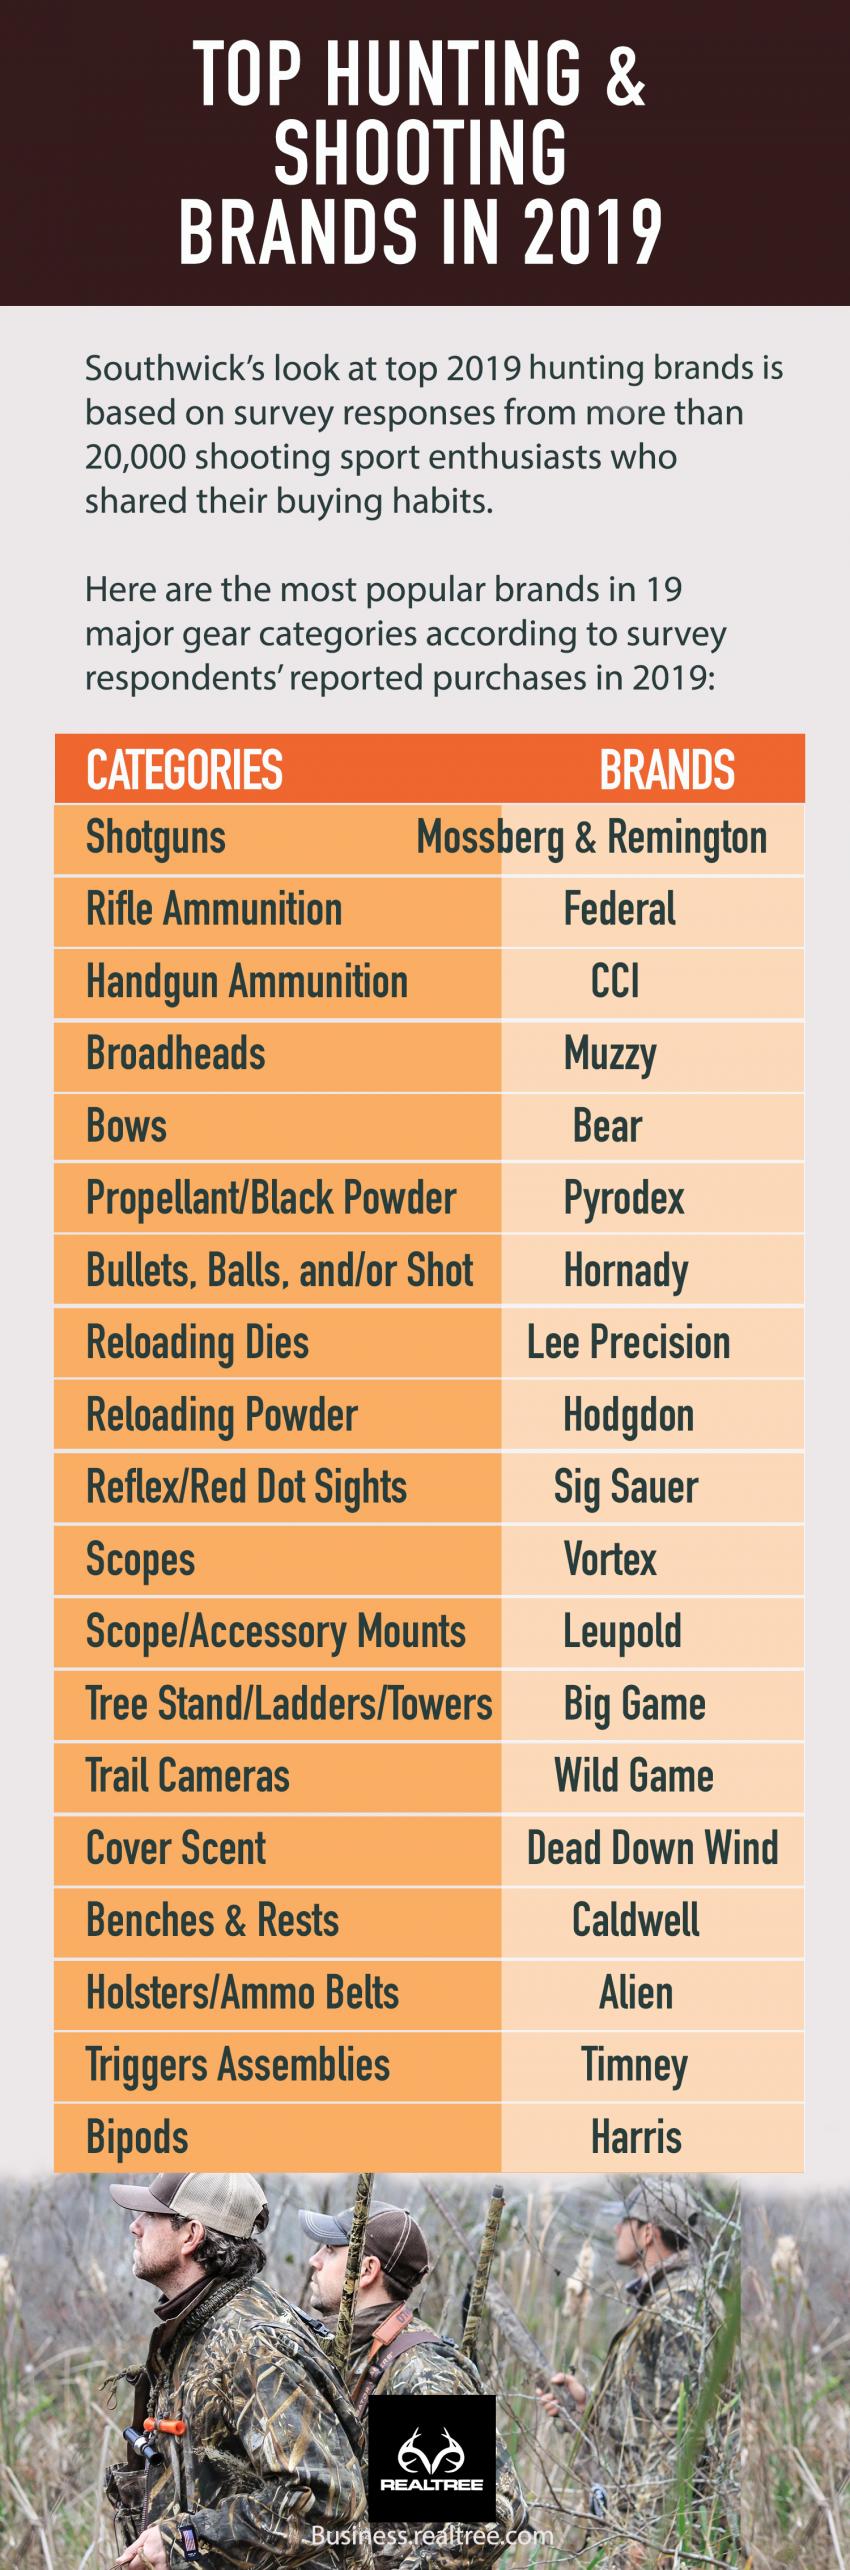 Top hunting and shooting brands in 2019